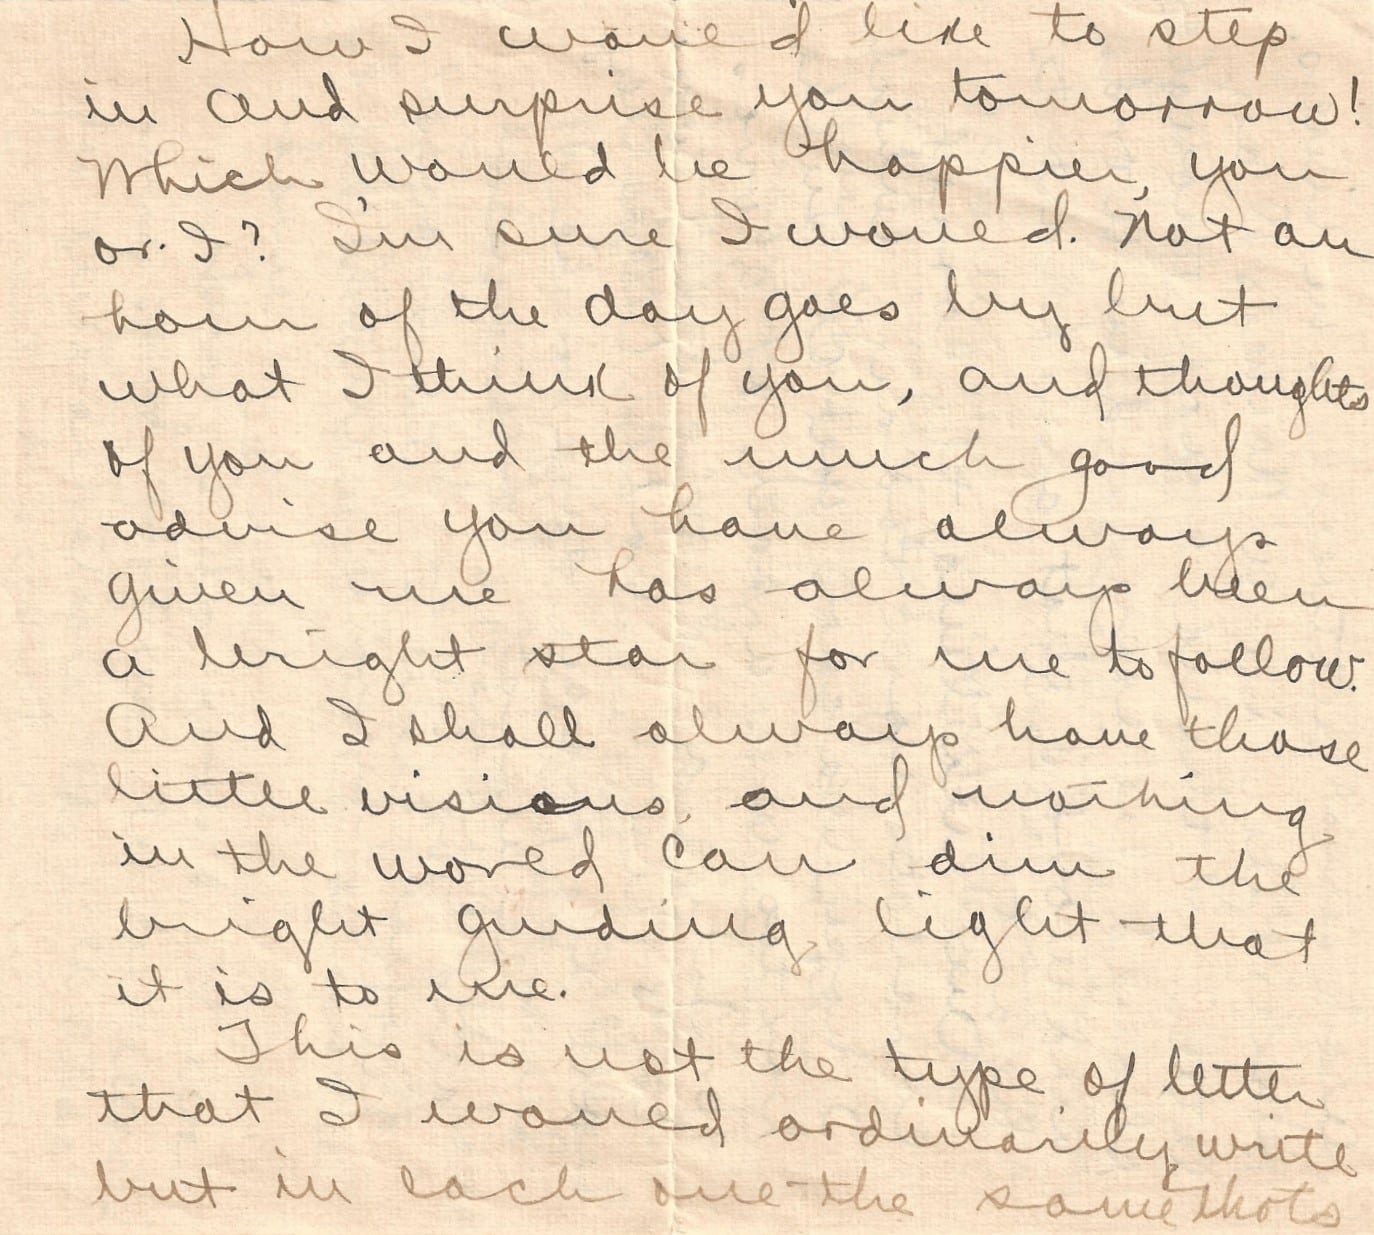 Mother's Day letter from World War I, page 3